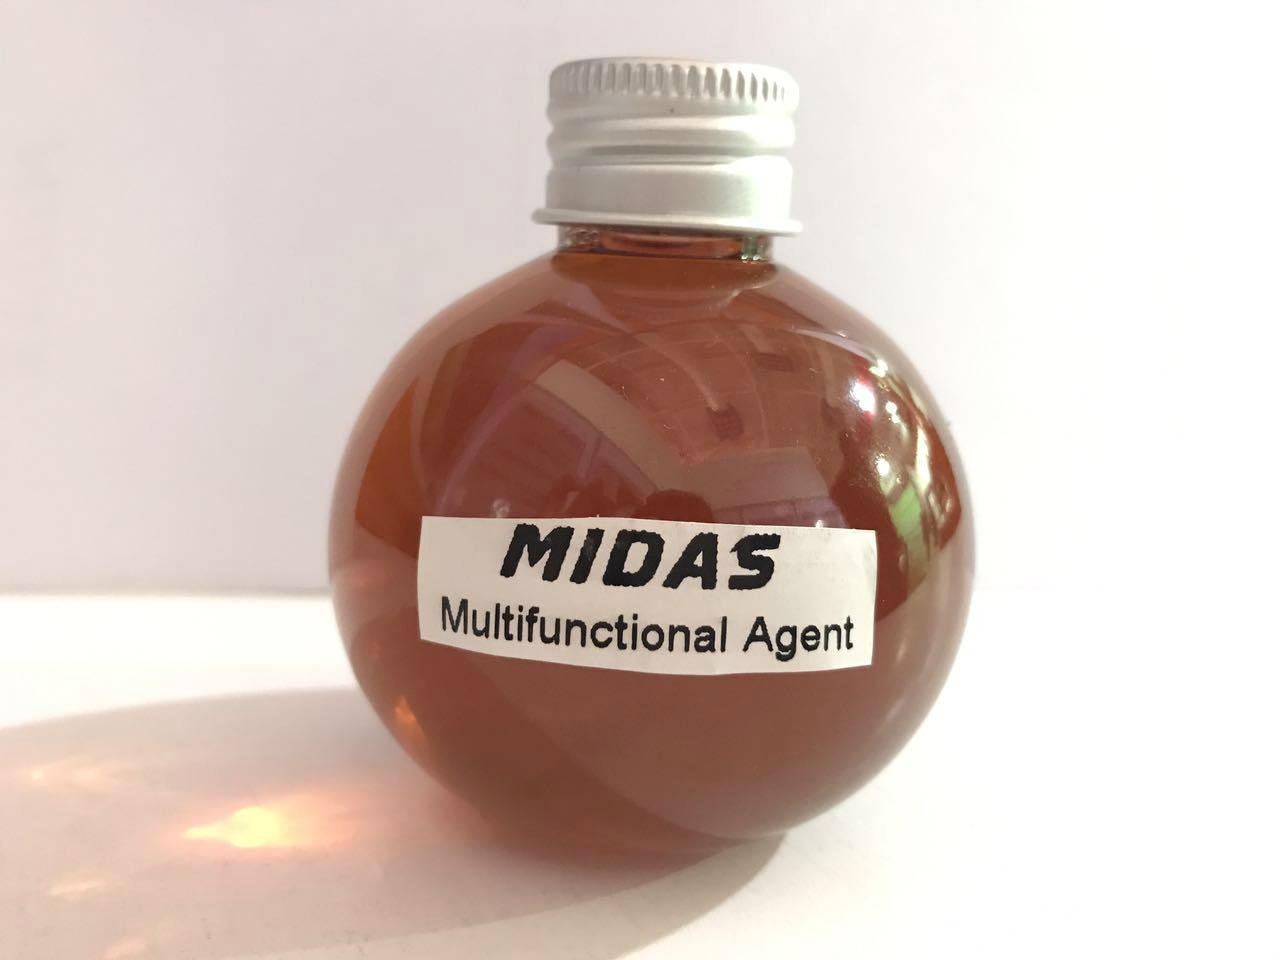 Multi-functional agent for stimulation by Midas Oilfield